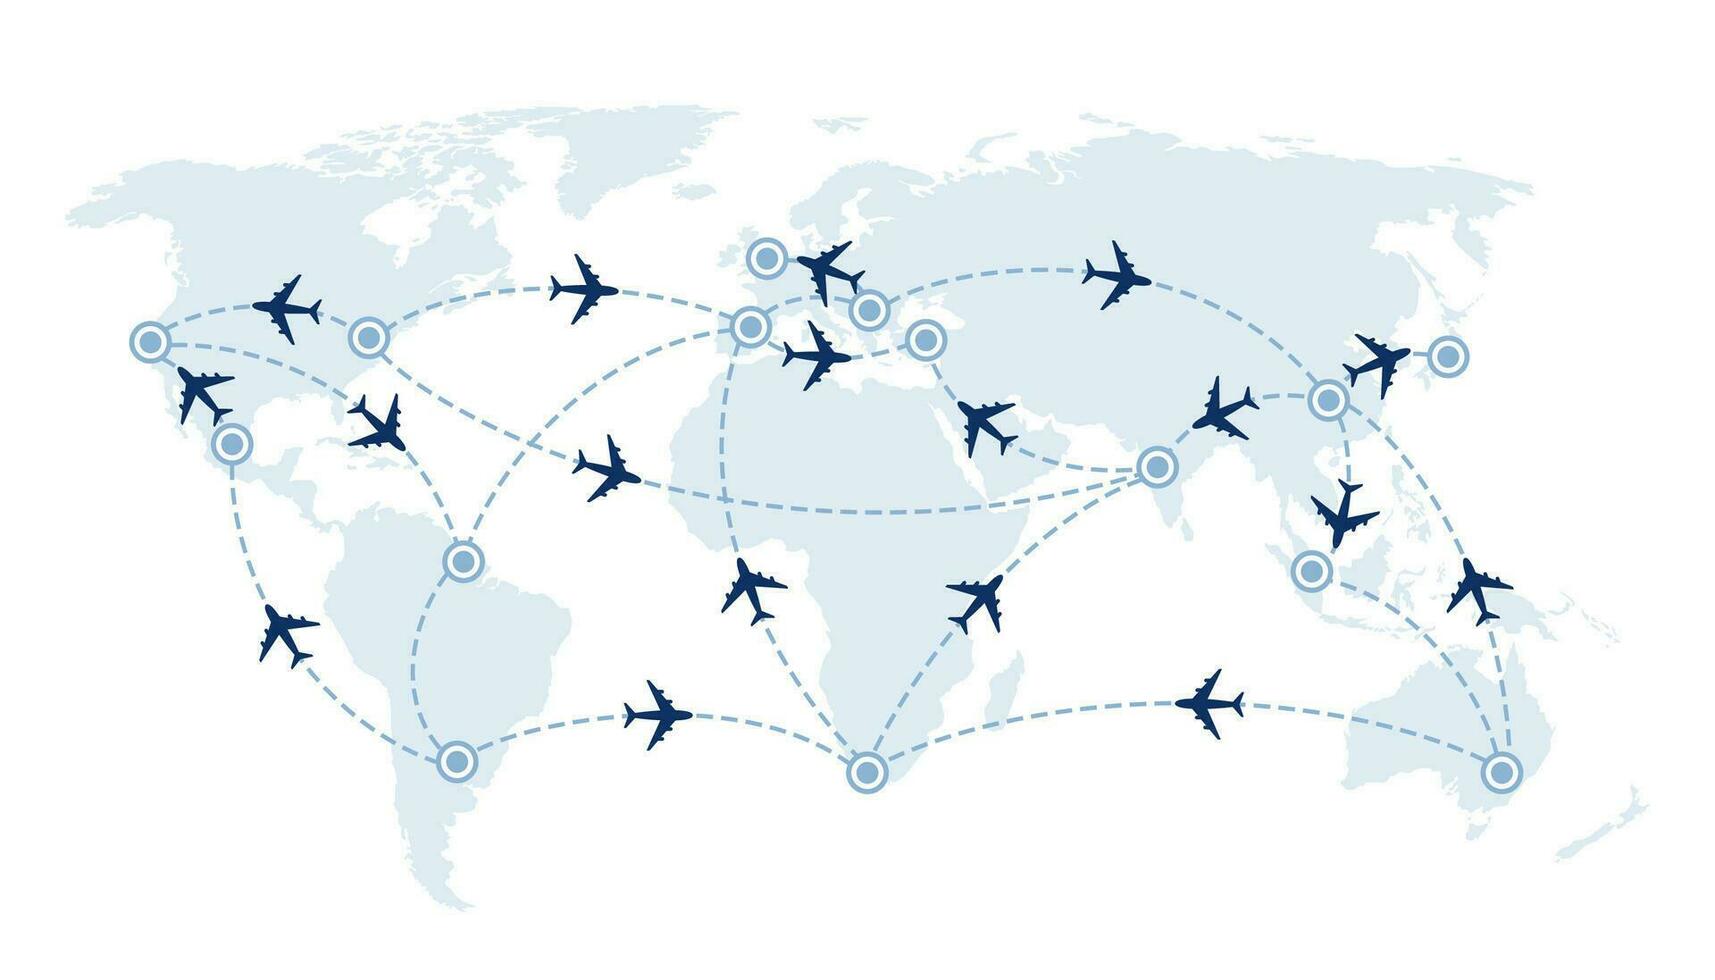 World travel map with airplanes, flight routes and pins marker. Vector illustration.